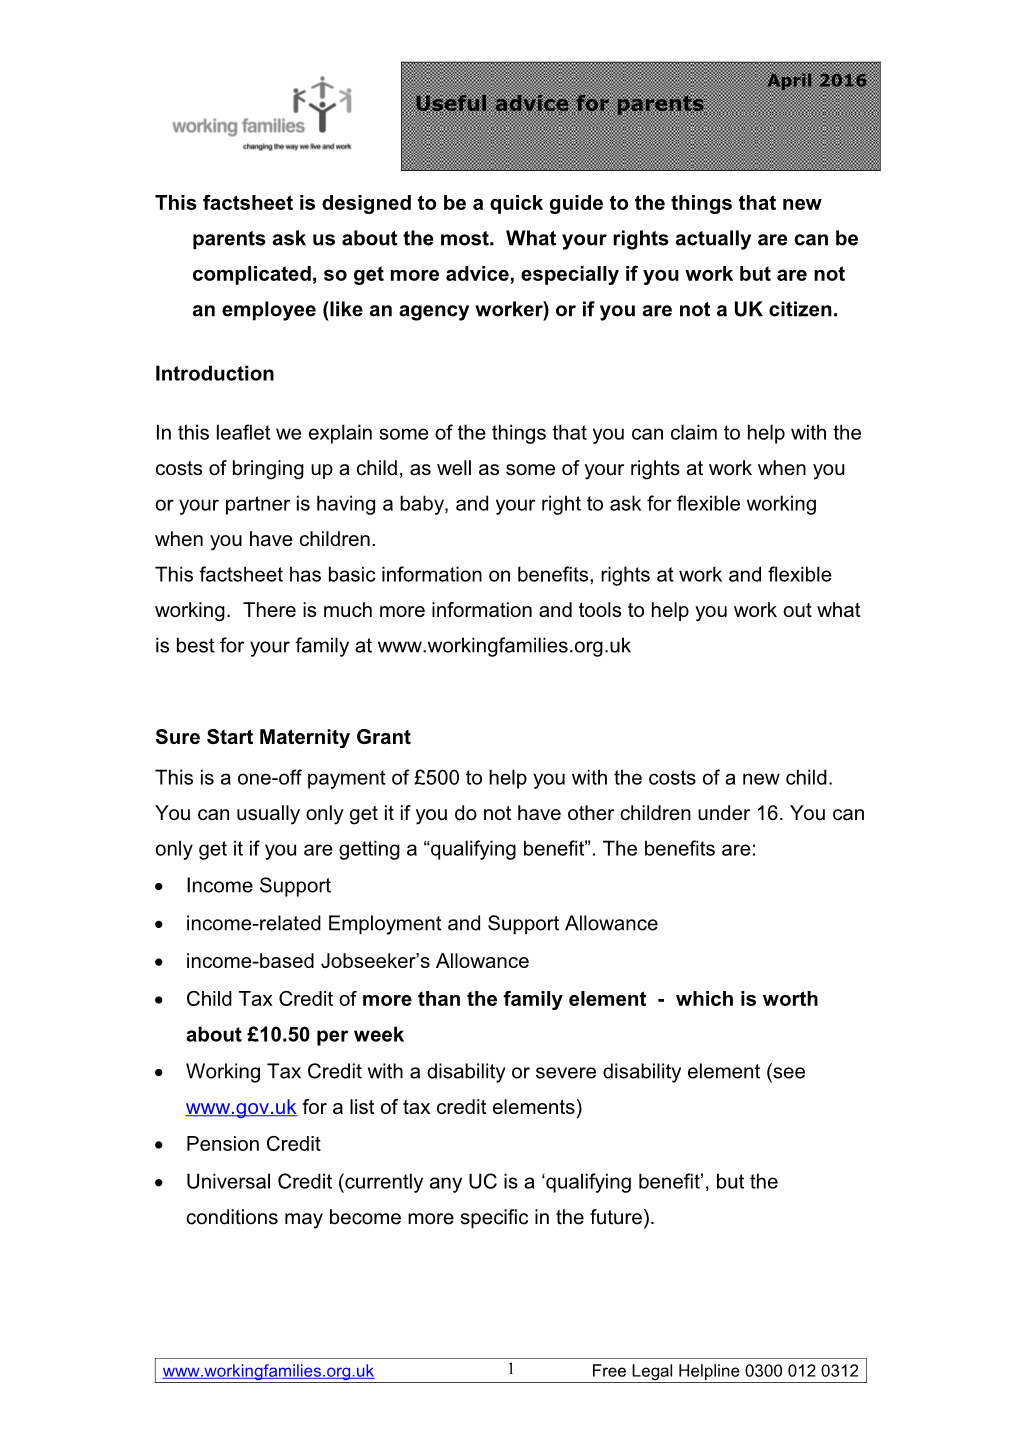 This Factsheet Is Designed to Be a Quick Guide to the Things That New Parents Ask Us About